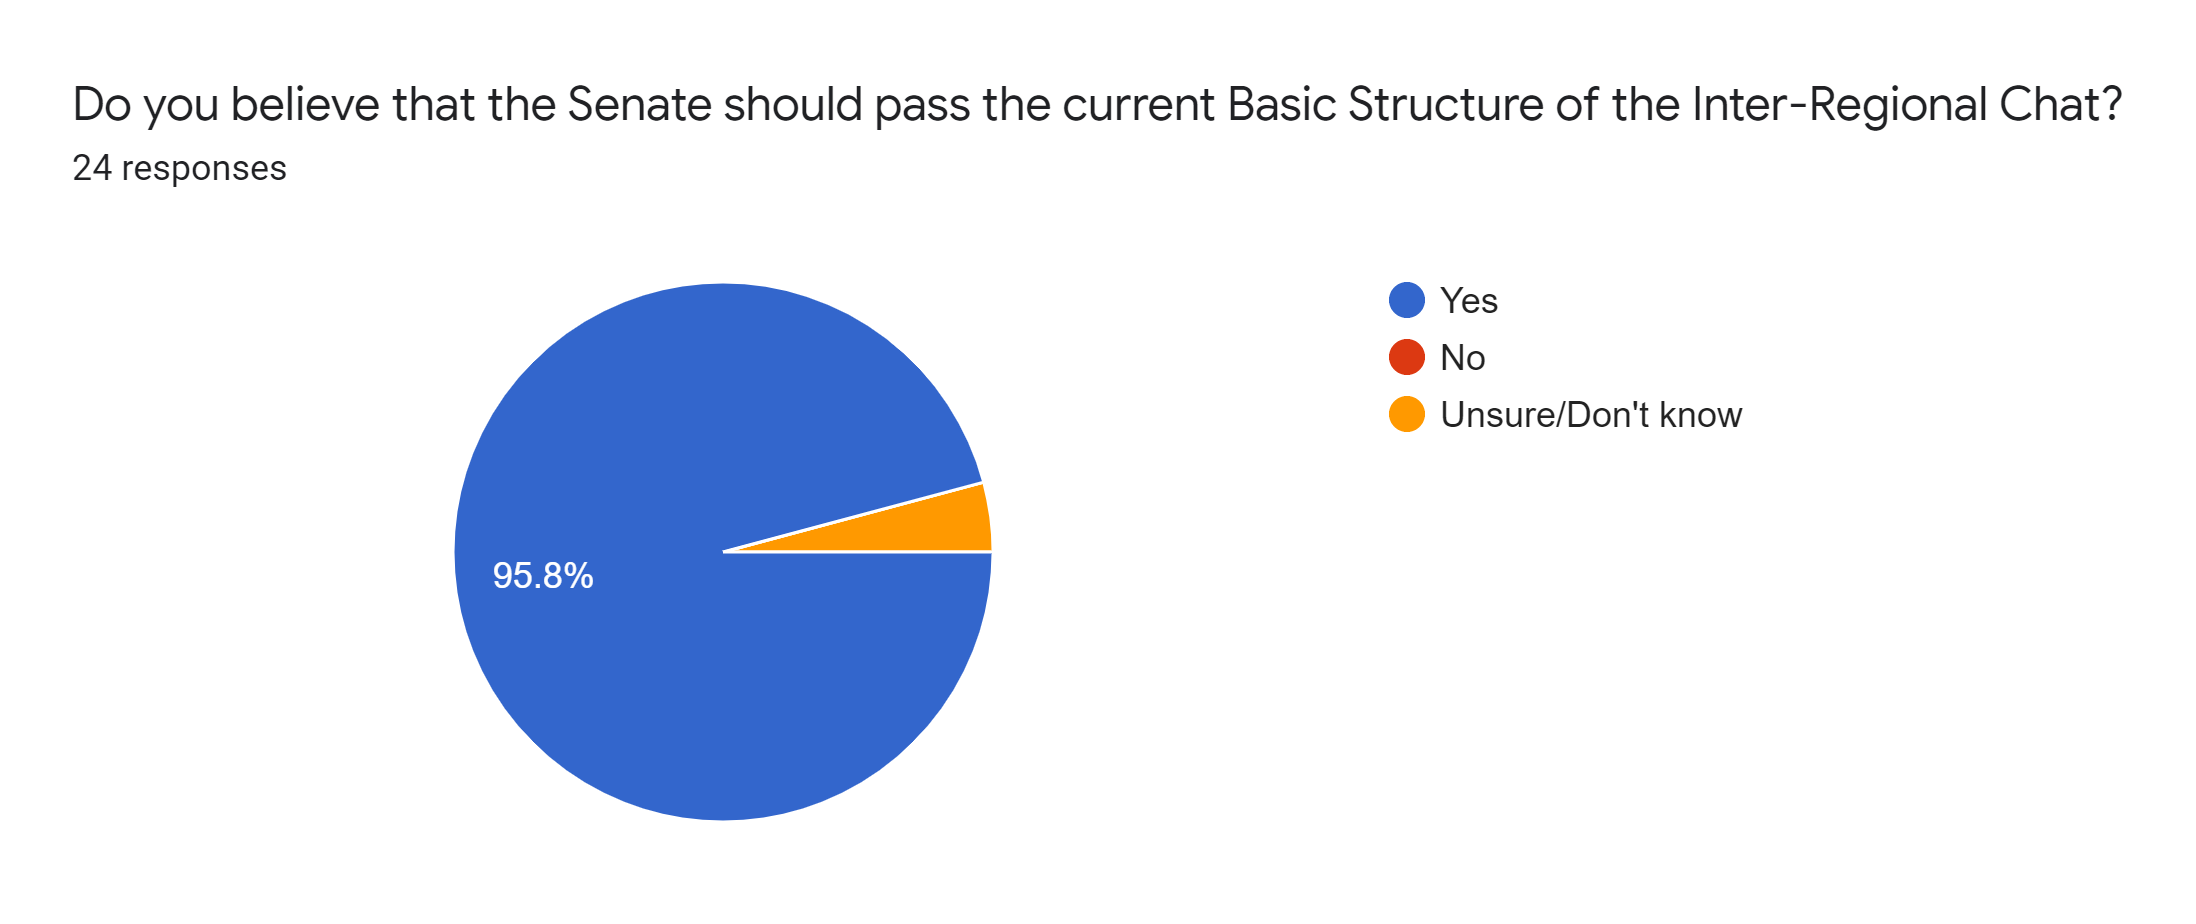 Forms response chart. Question title: Do you believe that the Senate should pass the current Basic Structure of the Inter-Regional Chat?. Number of responses: 24 responses.